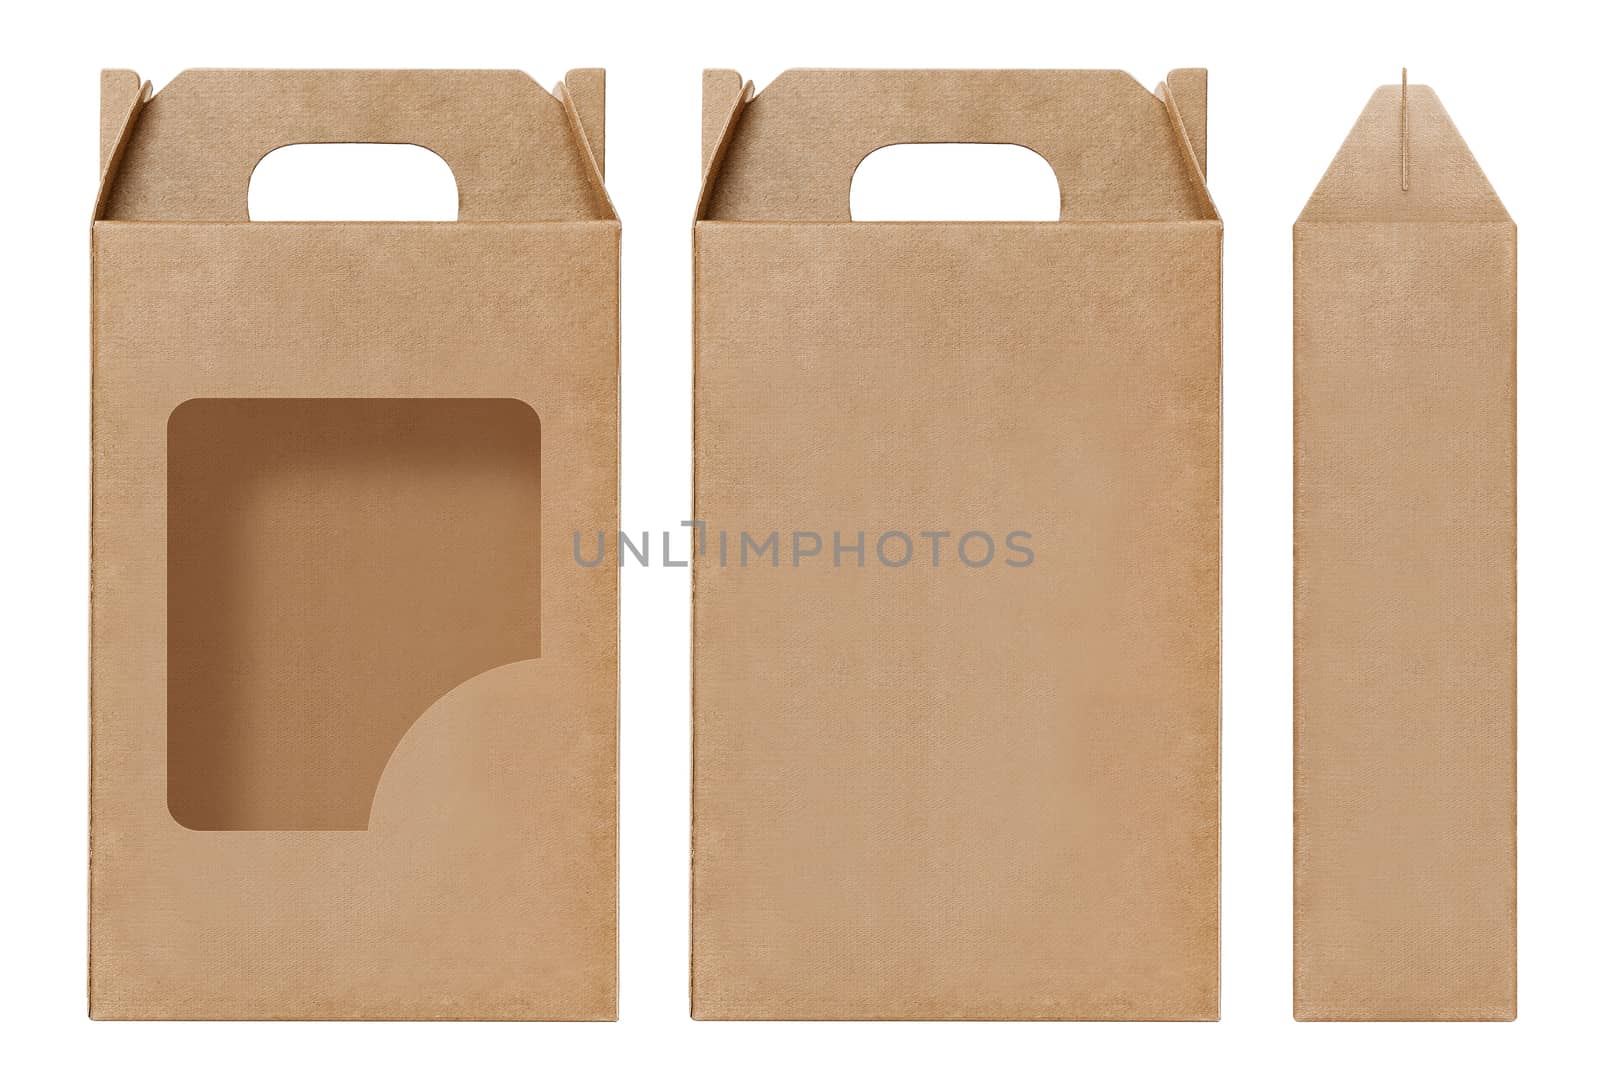 Box brown window shape cut out Packaging template, Empty kraft Box Cardboard isolated white background, Boxes Paper kraft natural material, Gift Box Brown Paper from Industrial Packaging carton by cgdeaw